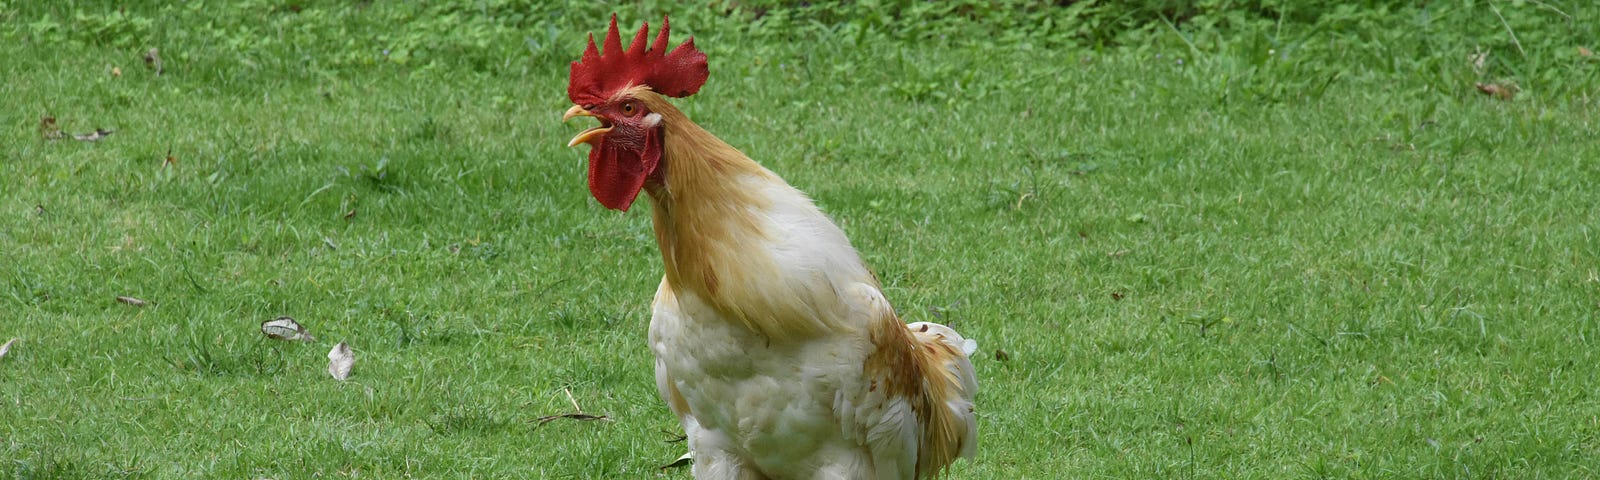 A white chicken with a red comb in a field